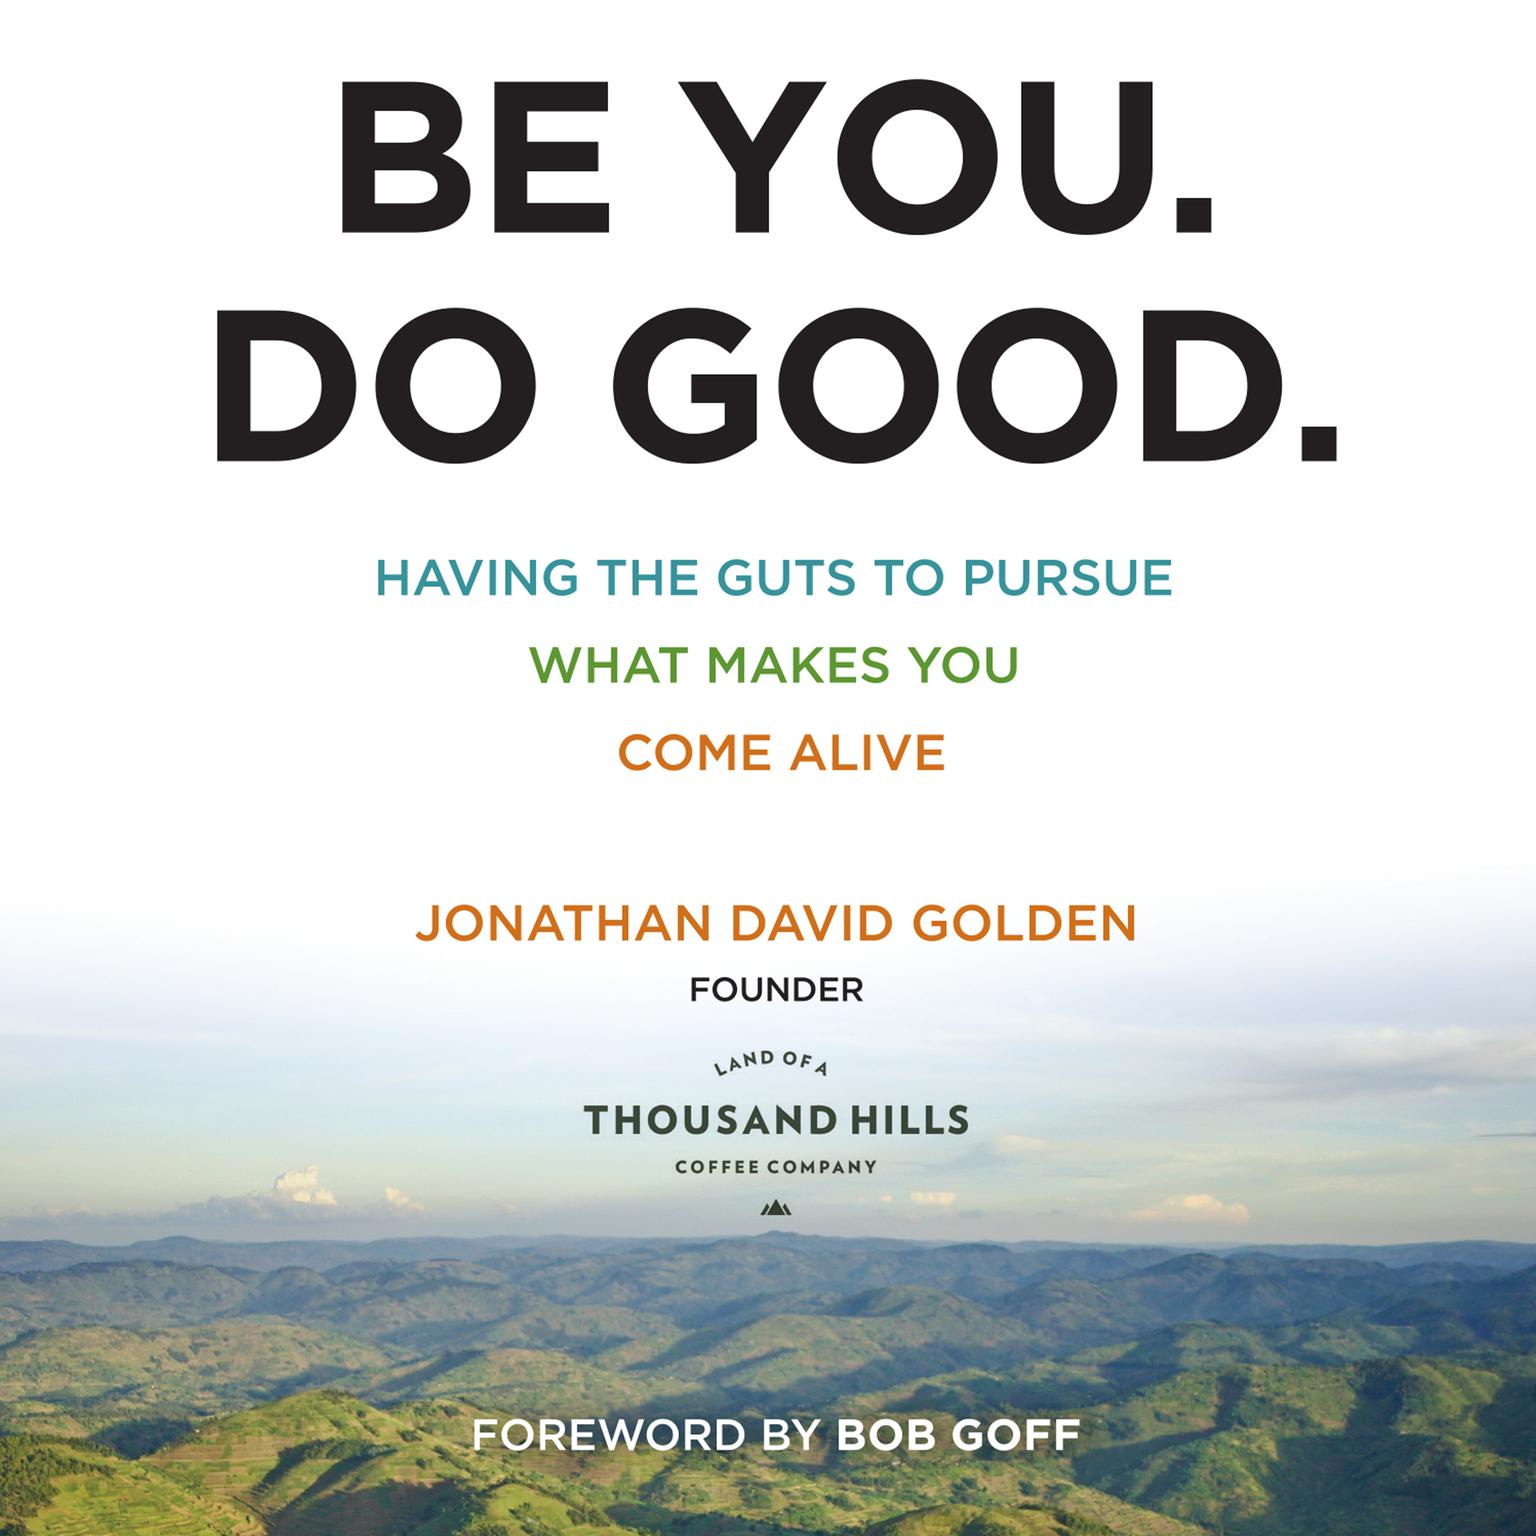 Be You. Do Good.: Having the Guts to Pursue What Makes You Come Alive Audiobook, by Jonathan David Golden